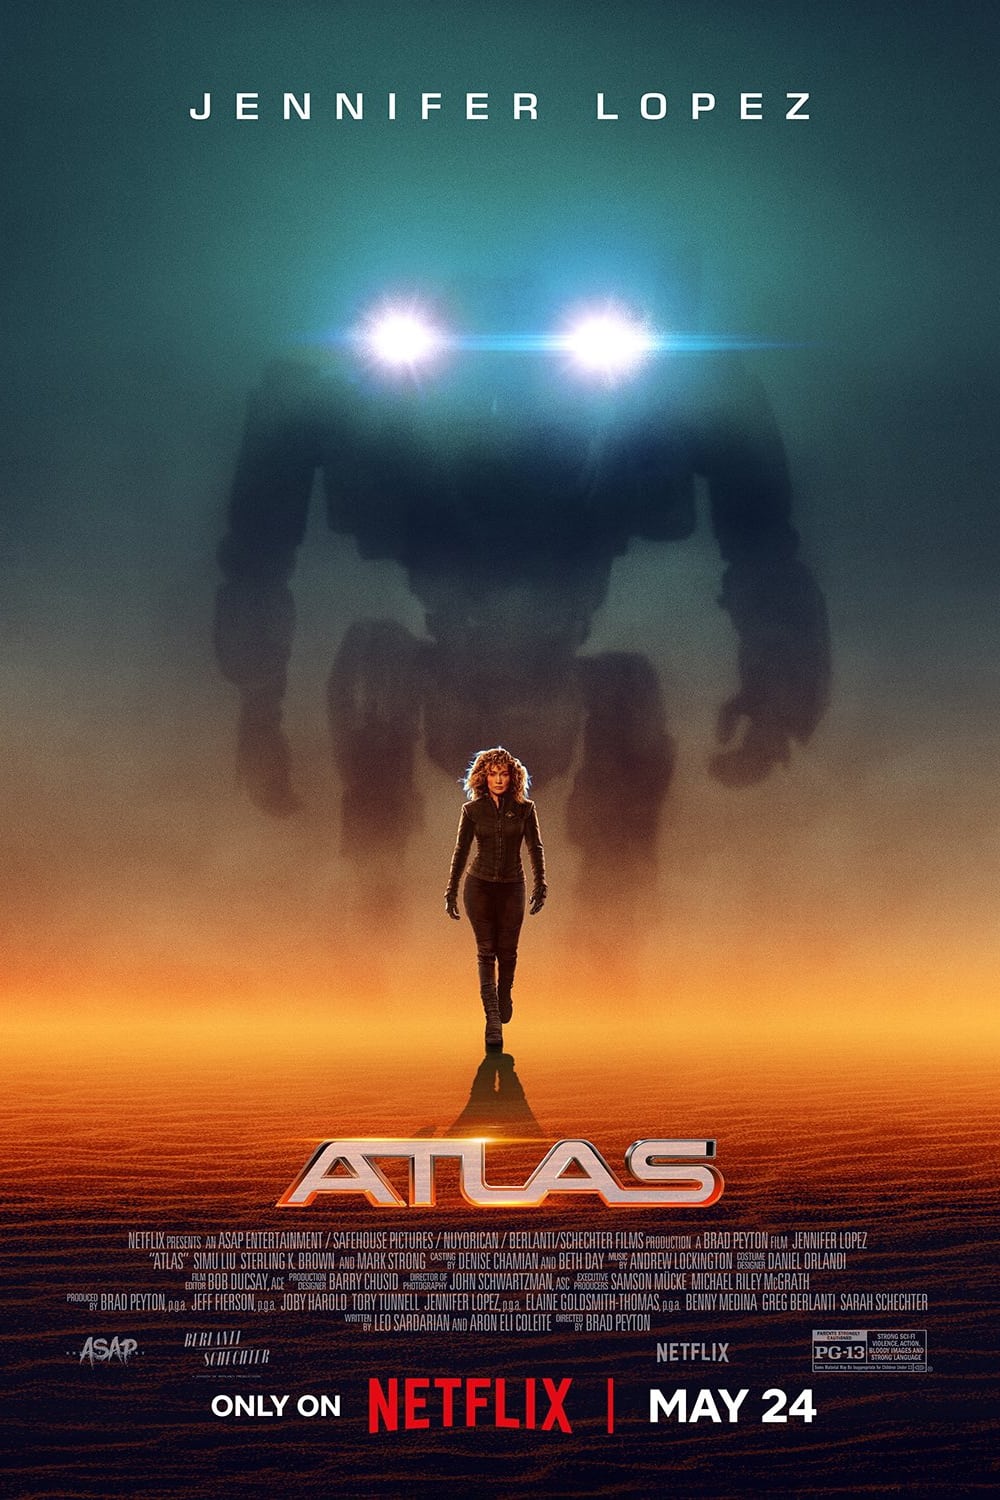 ATLAS Trailer Finds Jennifer Lopez Reluctantly Teaming Up With The Robot From the Titanfall Games.